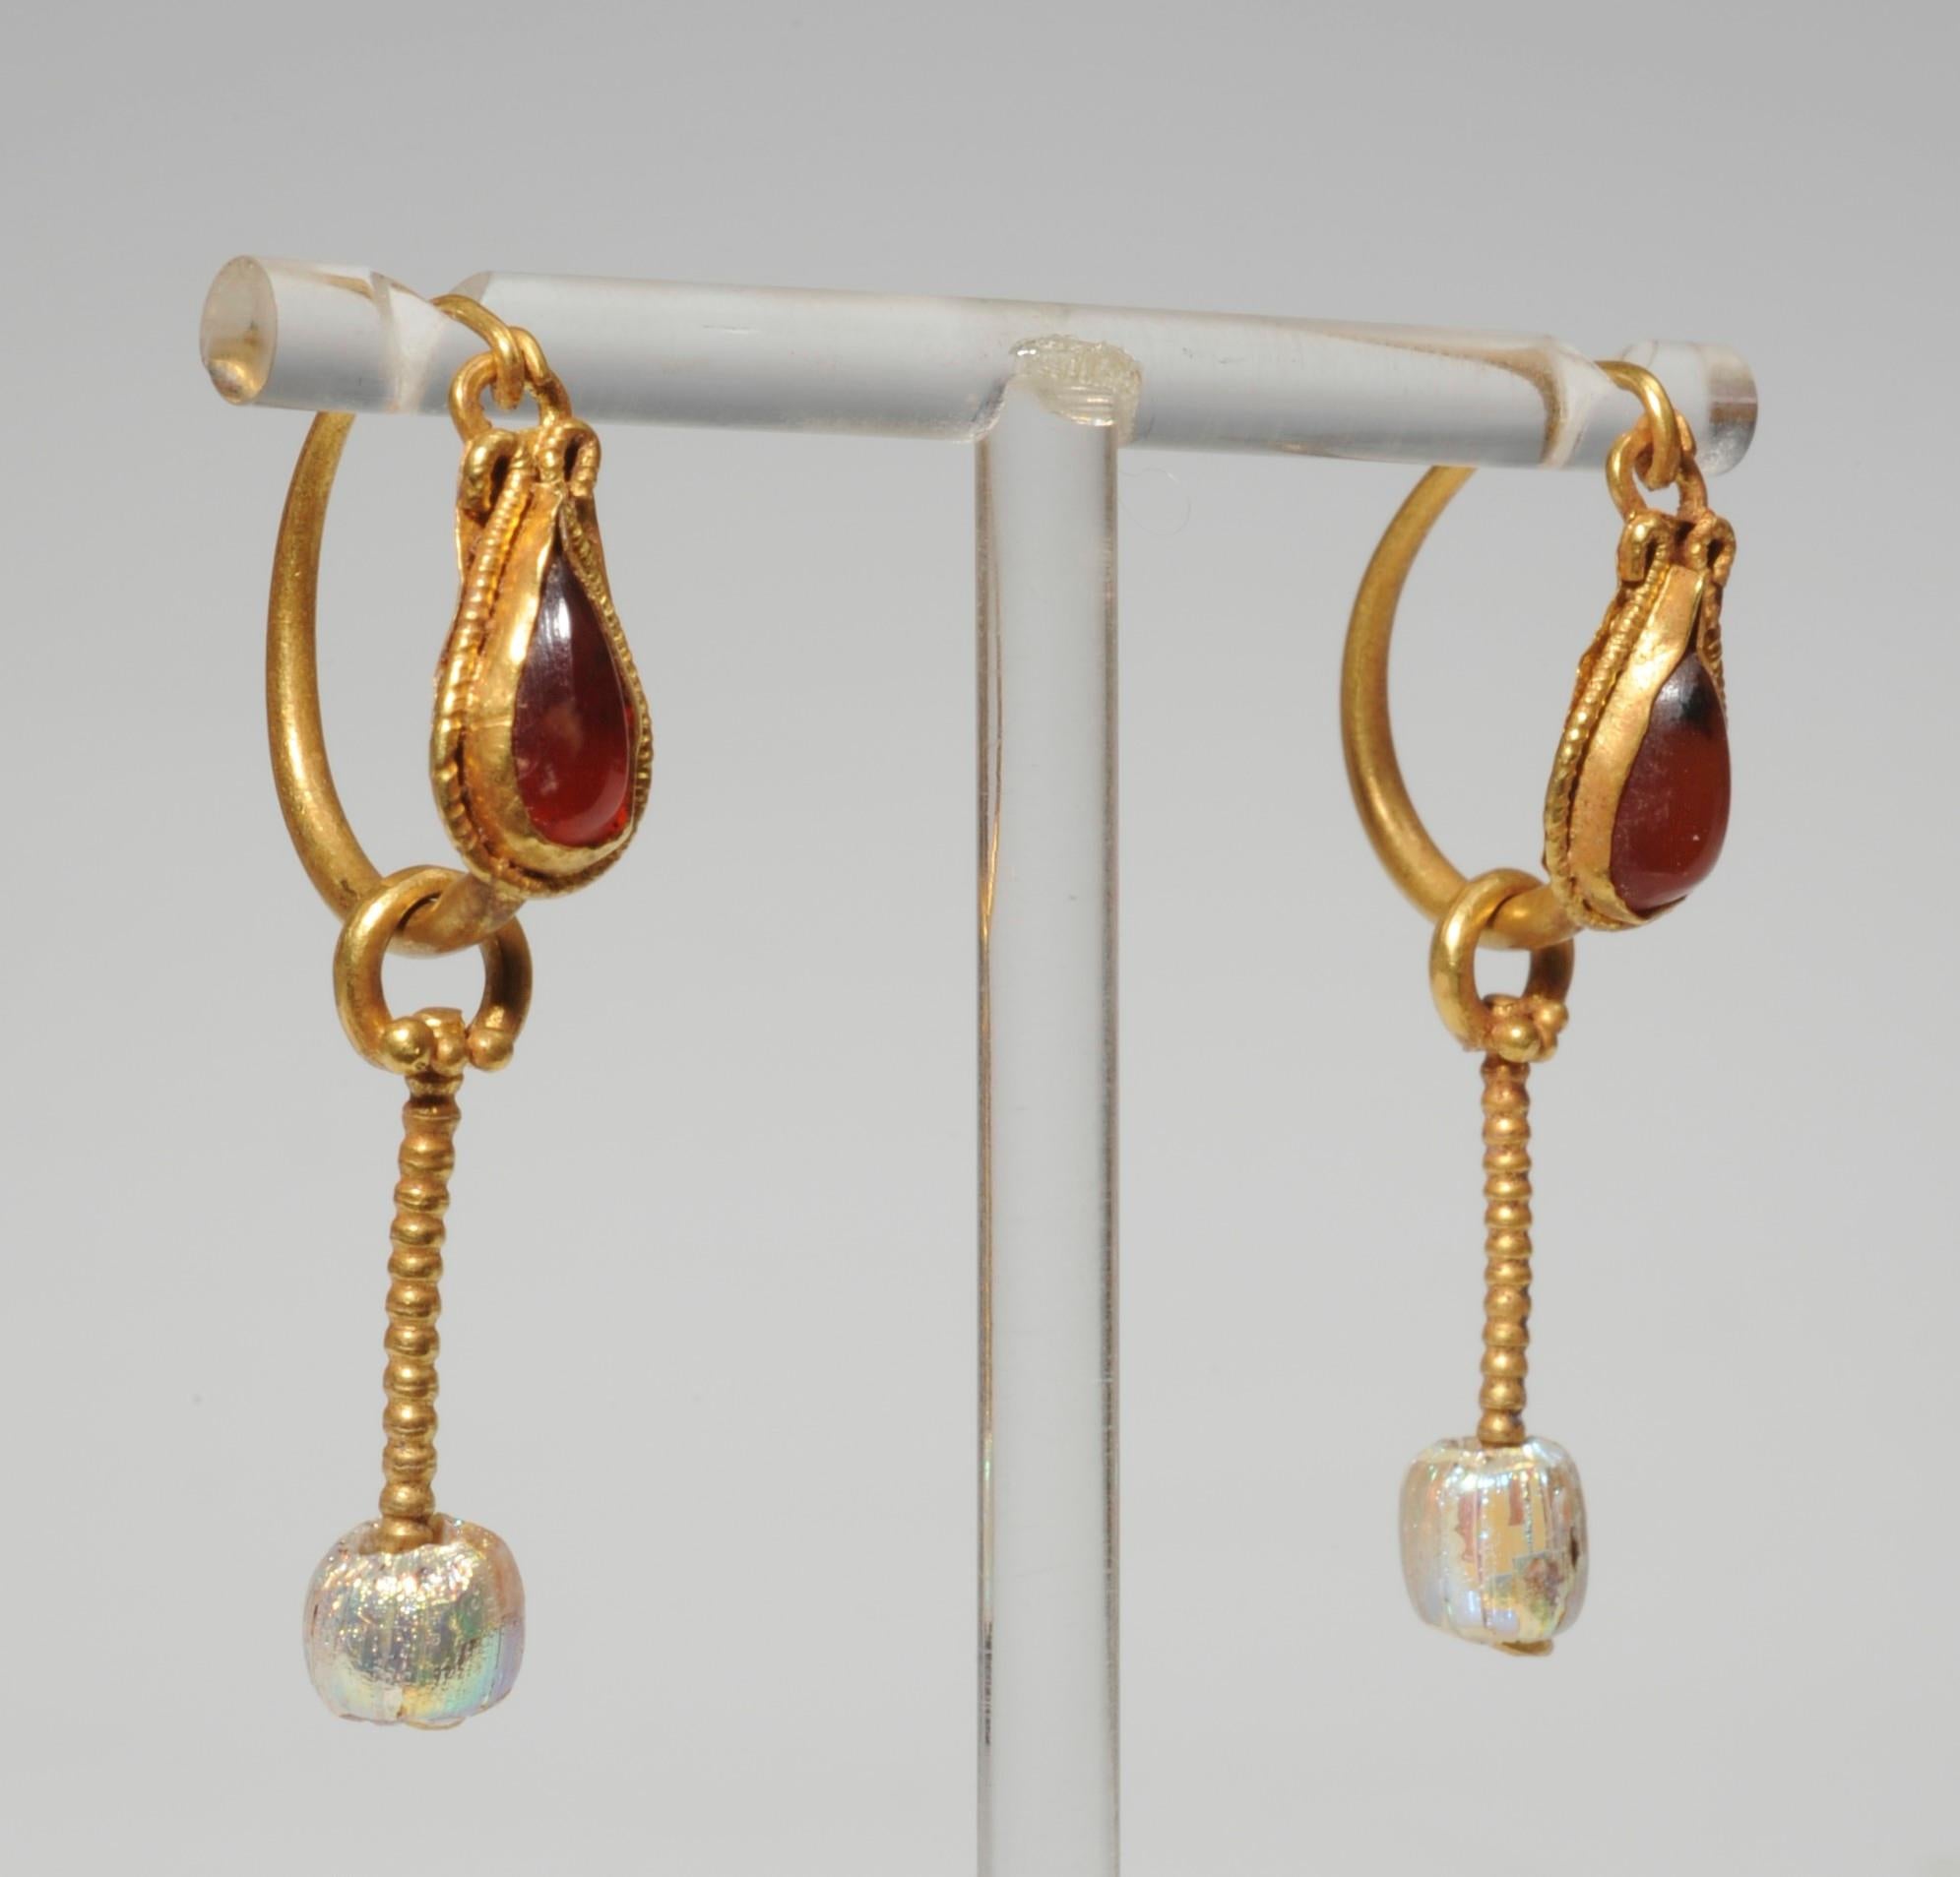 A pair of precious golden bow-earrings. The box of the drop shaped carnelian inlay is surrounded with a twisted wire that ends at the top into a volute and a little ring. From a small ring decorated with three globules hangs a bobble into which a